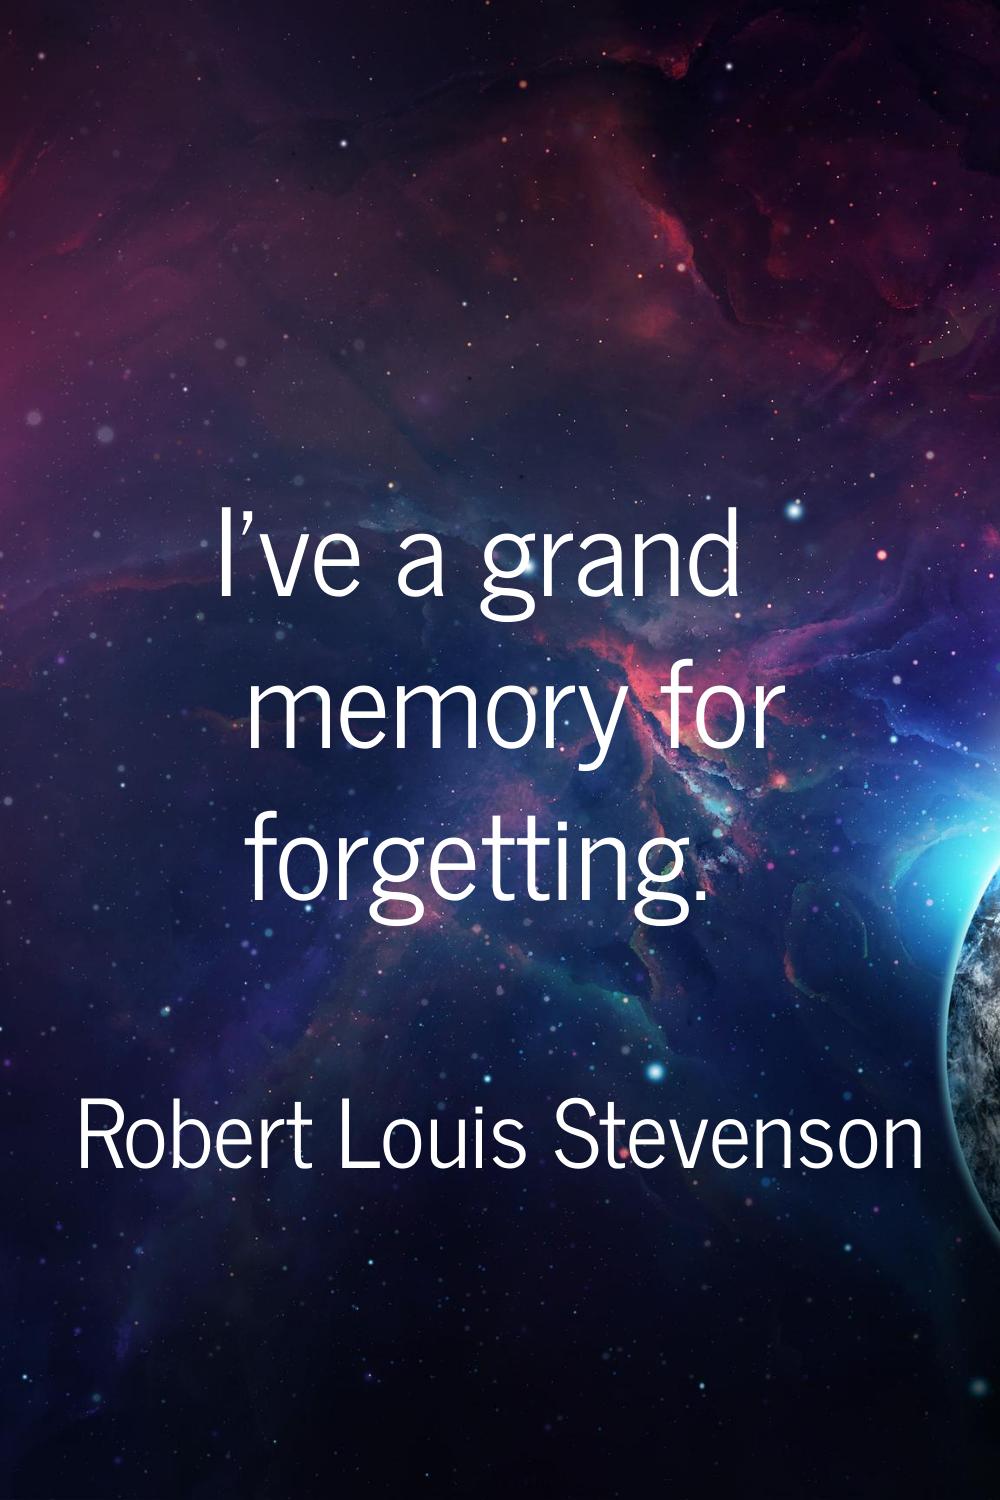 I've a grand memory for forgetting.